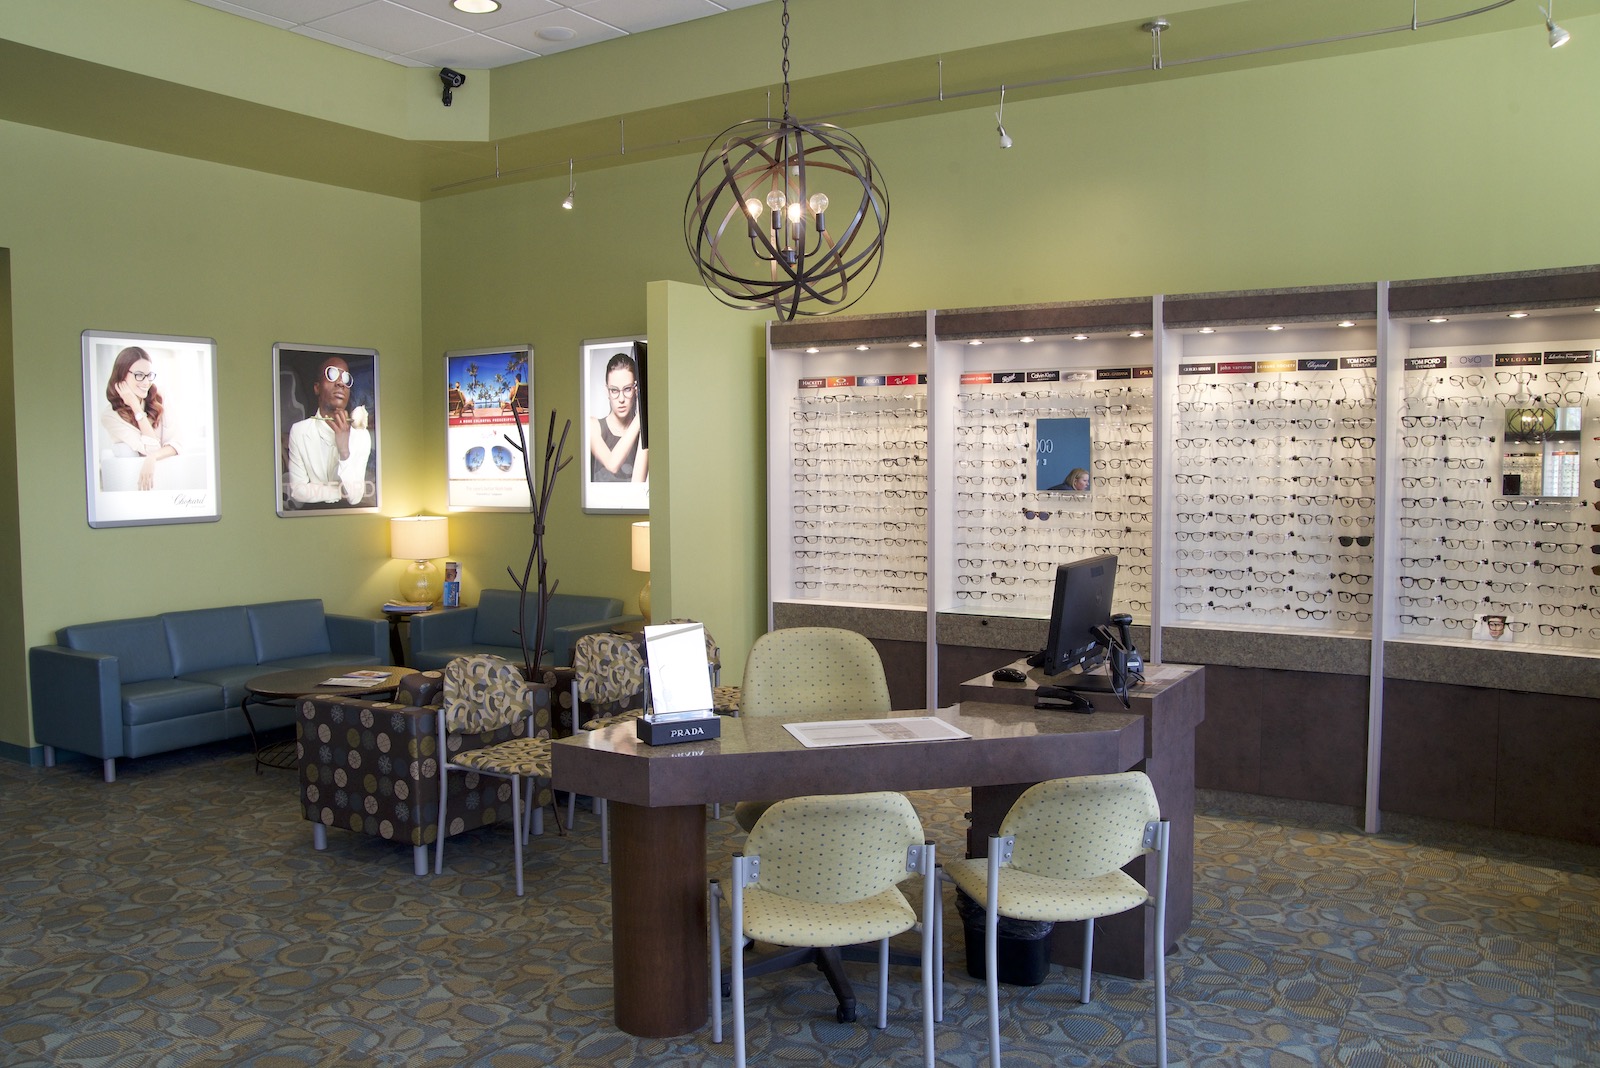 Good Looks Eyewear, 20215 Route 19, Cranberry Township, PA, Offices and  clinics of optometrists - MapQuest